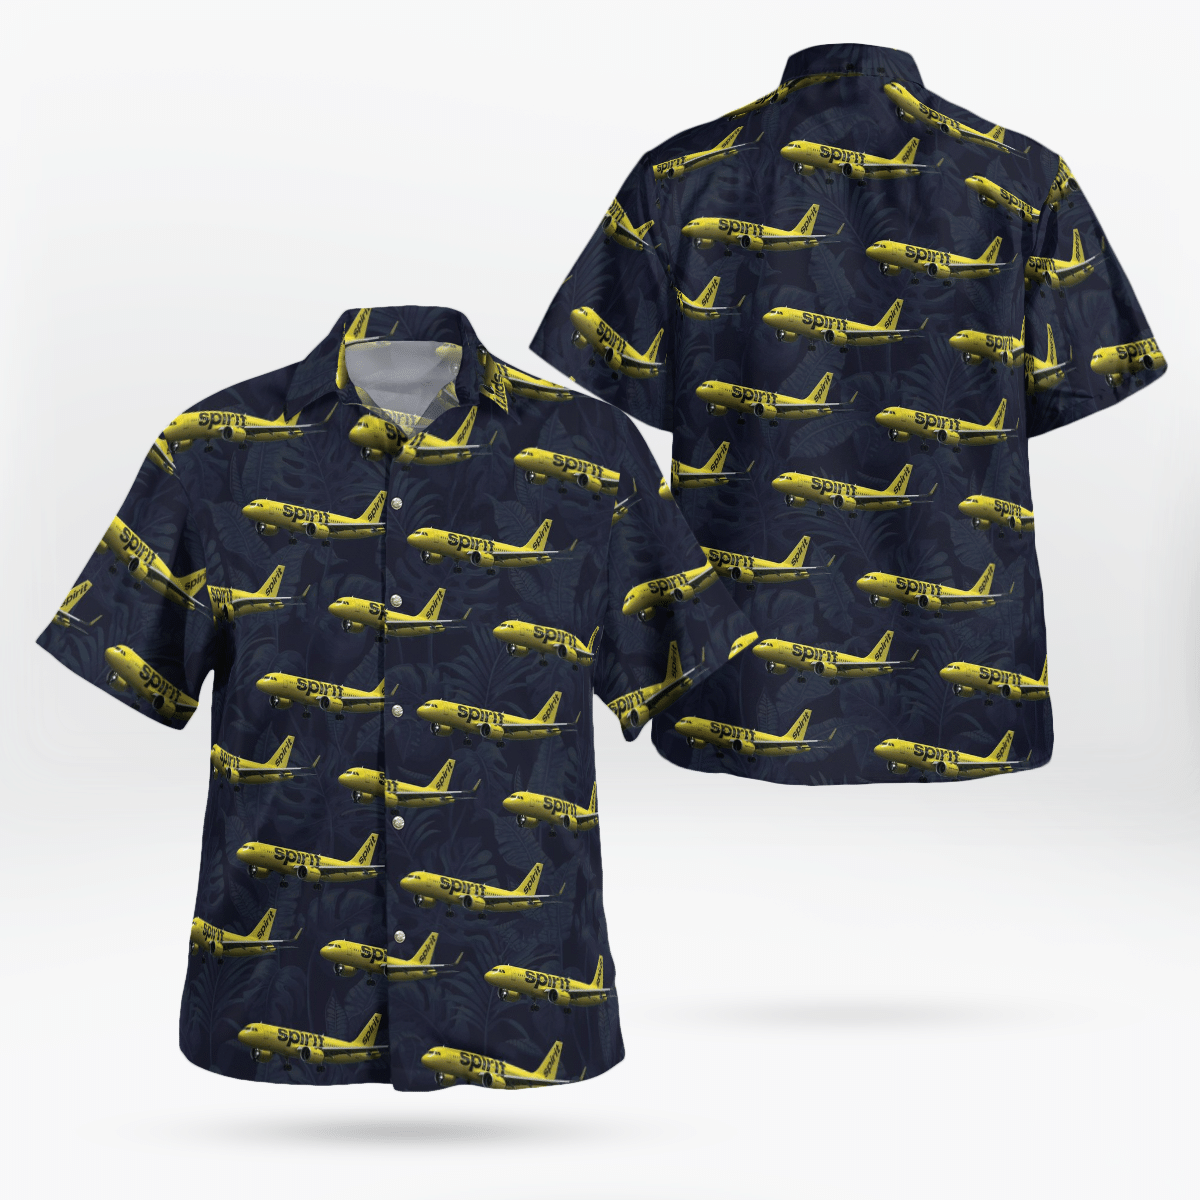 Consider getting these Hawaiian Shirt for your friends 343